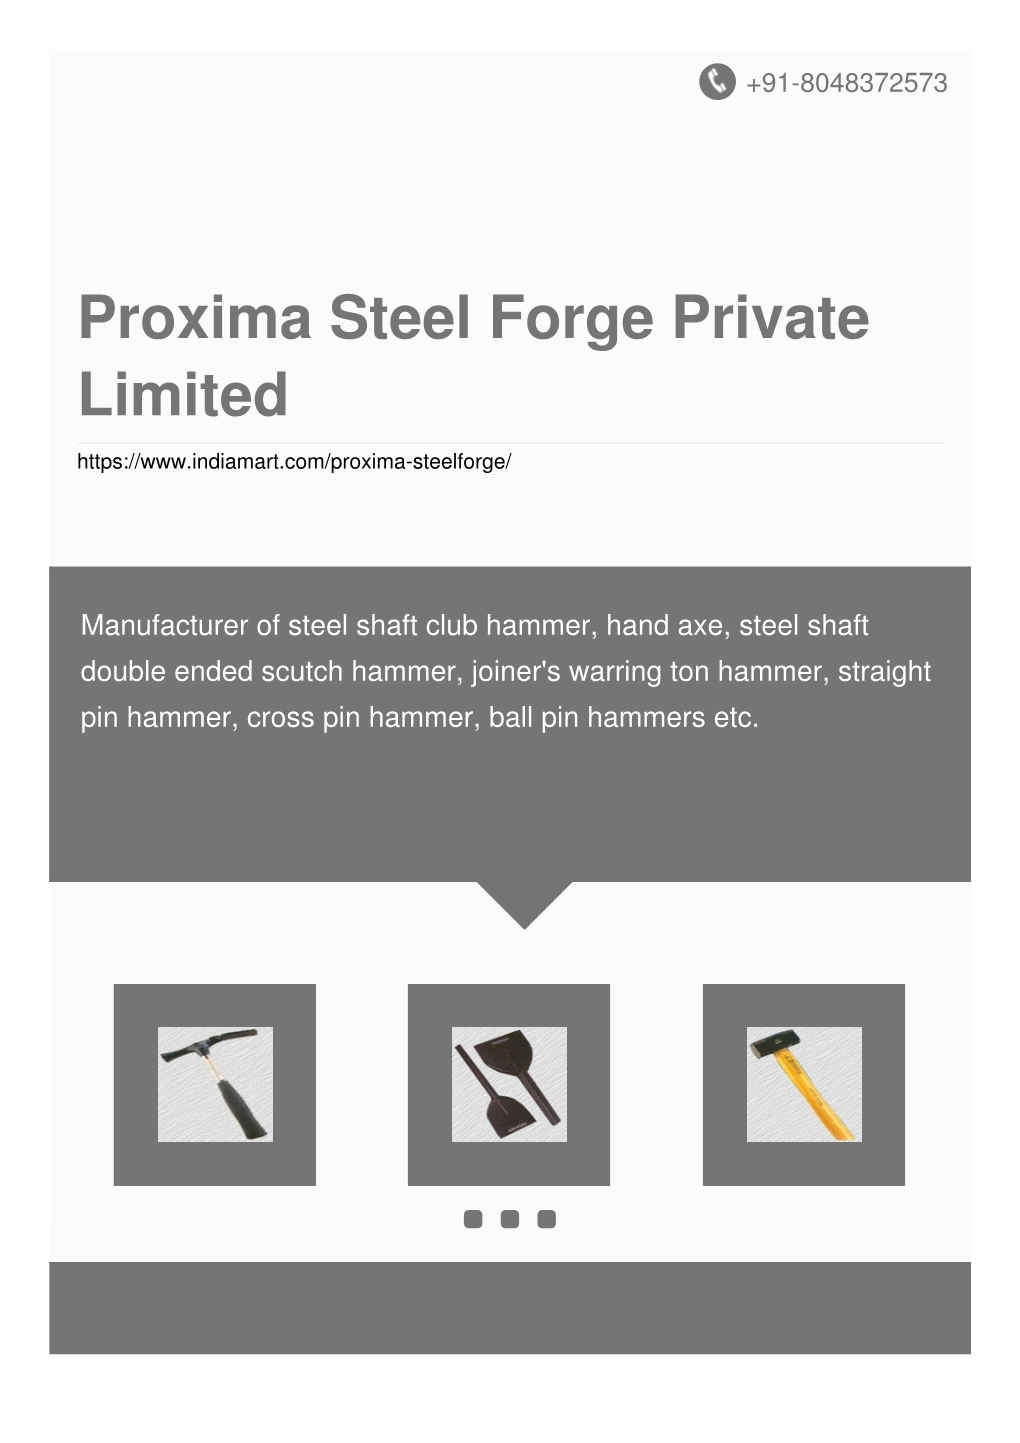 Proxima Steel Forge Private Limited